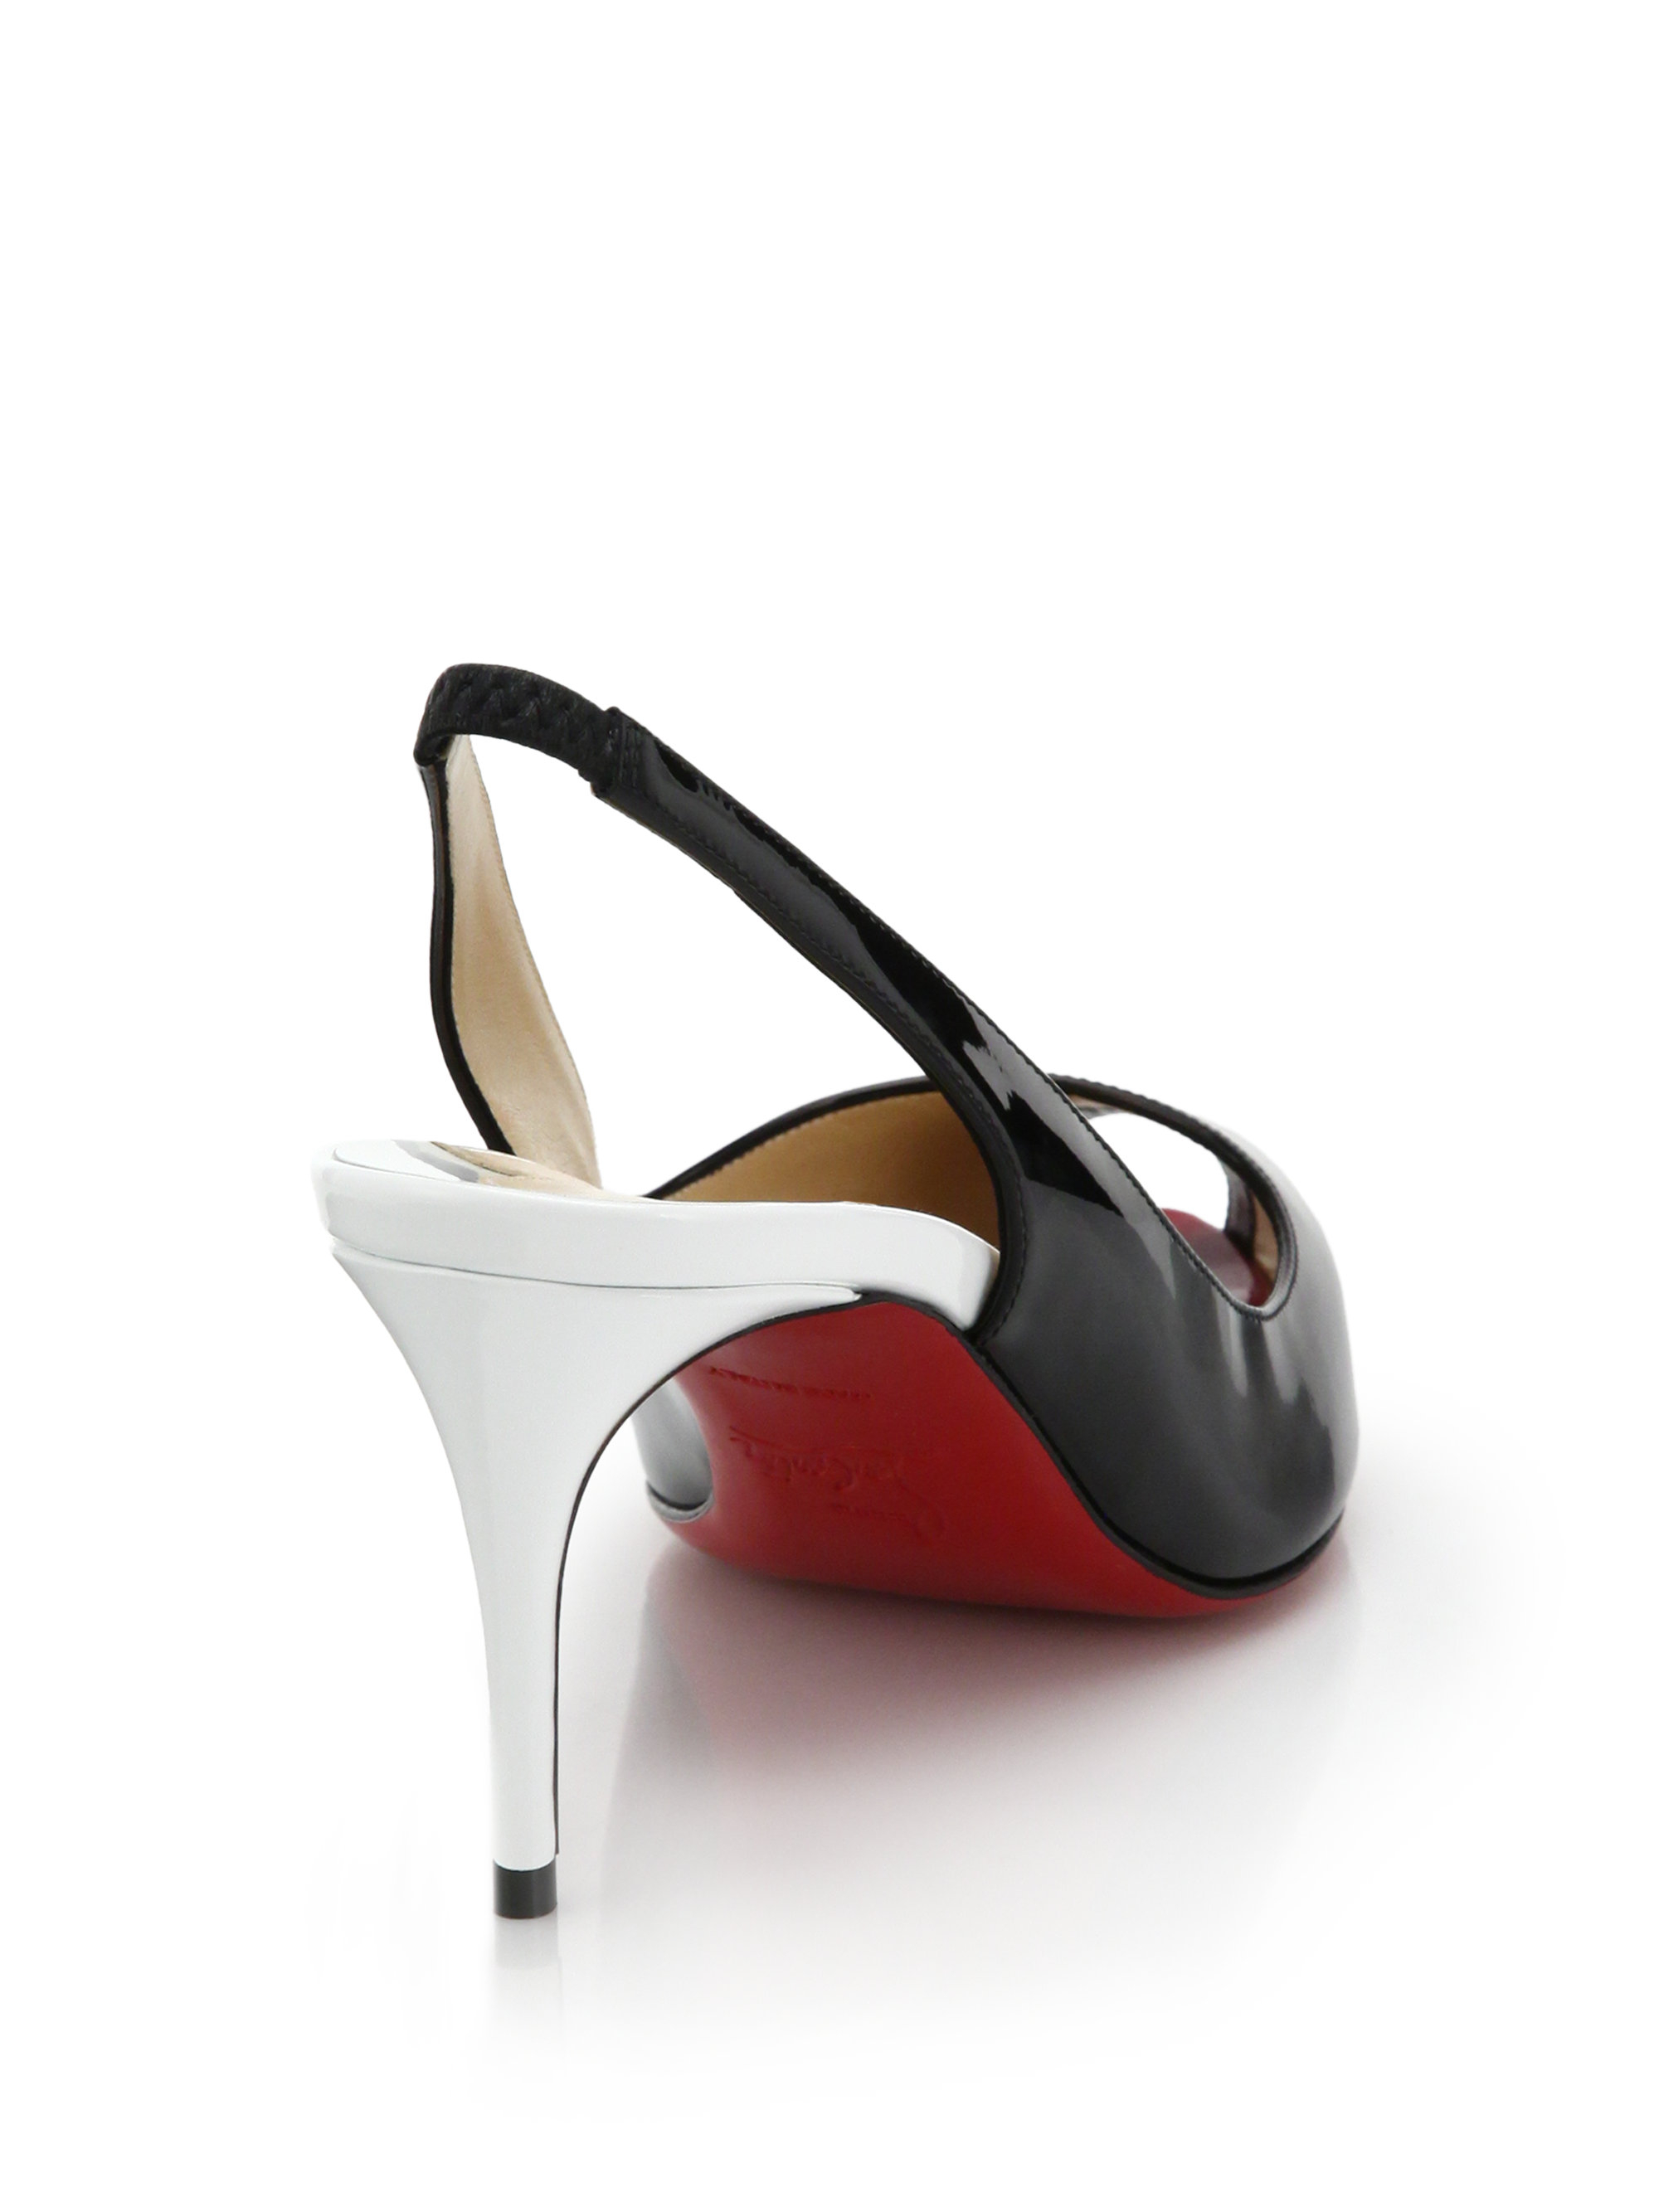 knock off red bottom shoes for women - Christian louboutin Two-Tone Patent Leather Peep-Toe Slingback ...